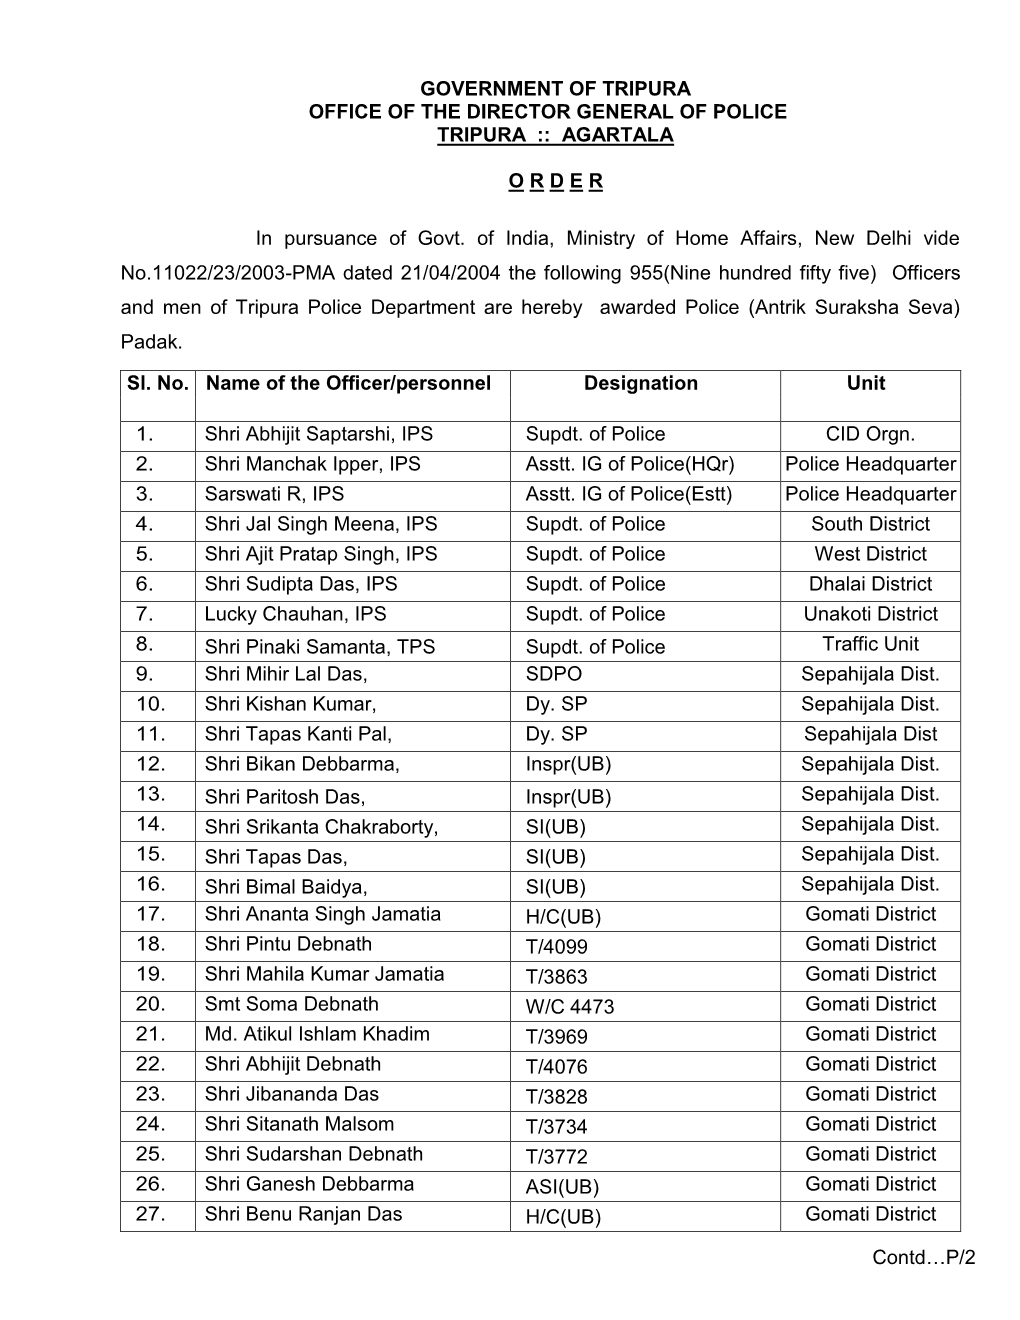 AGARTALA ORDER in Pursuance of Govt. of India, M